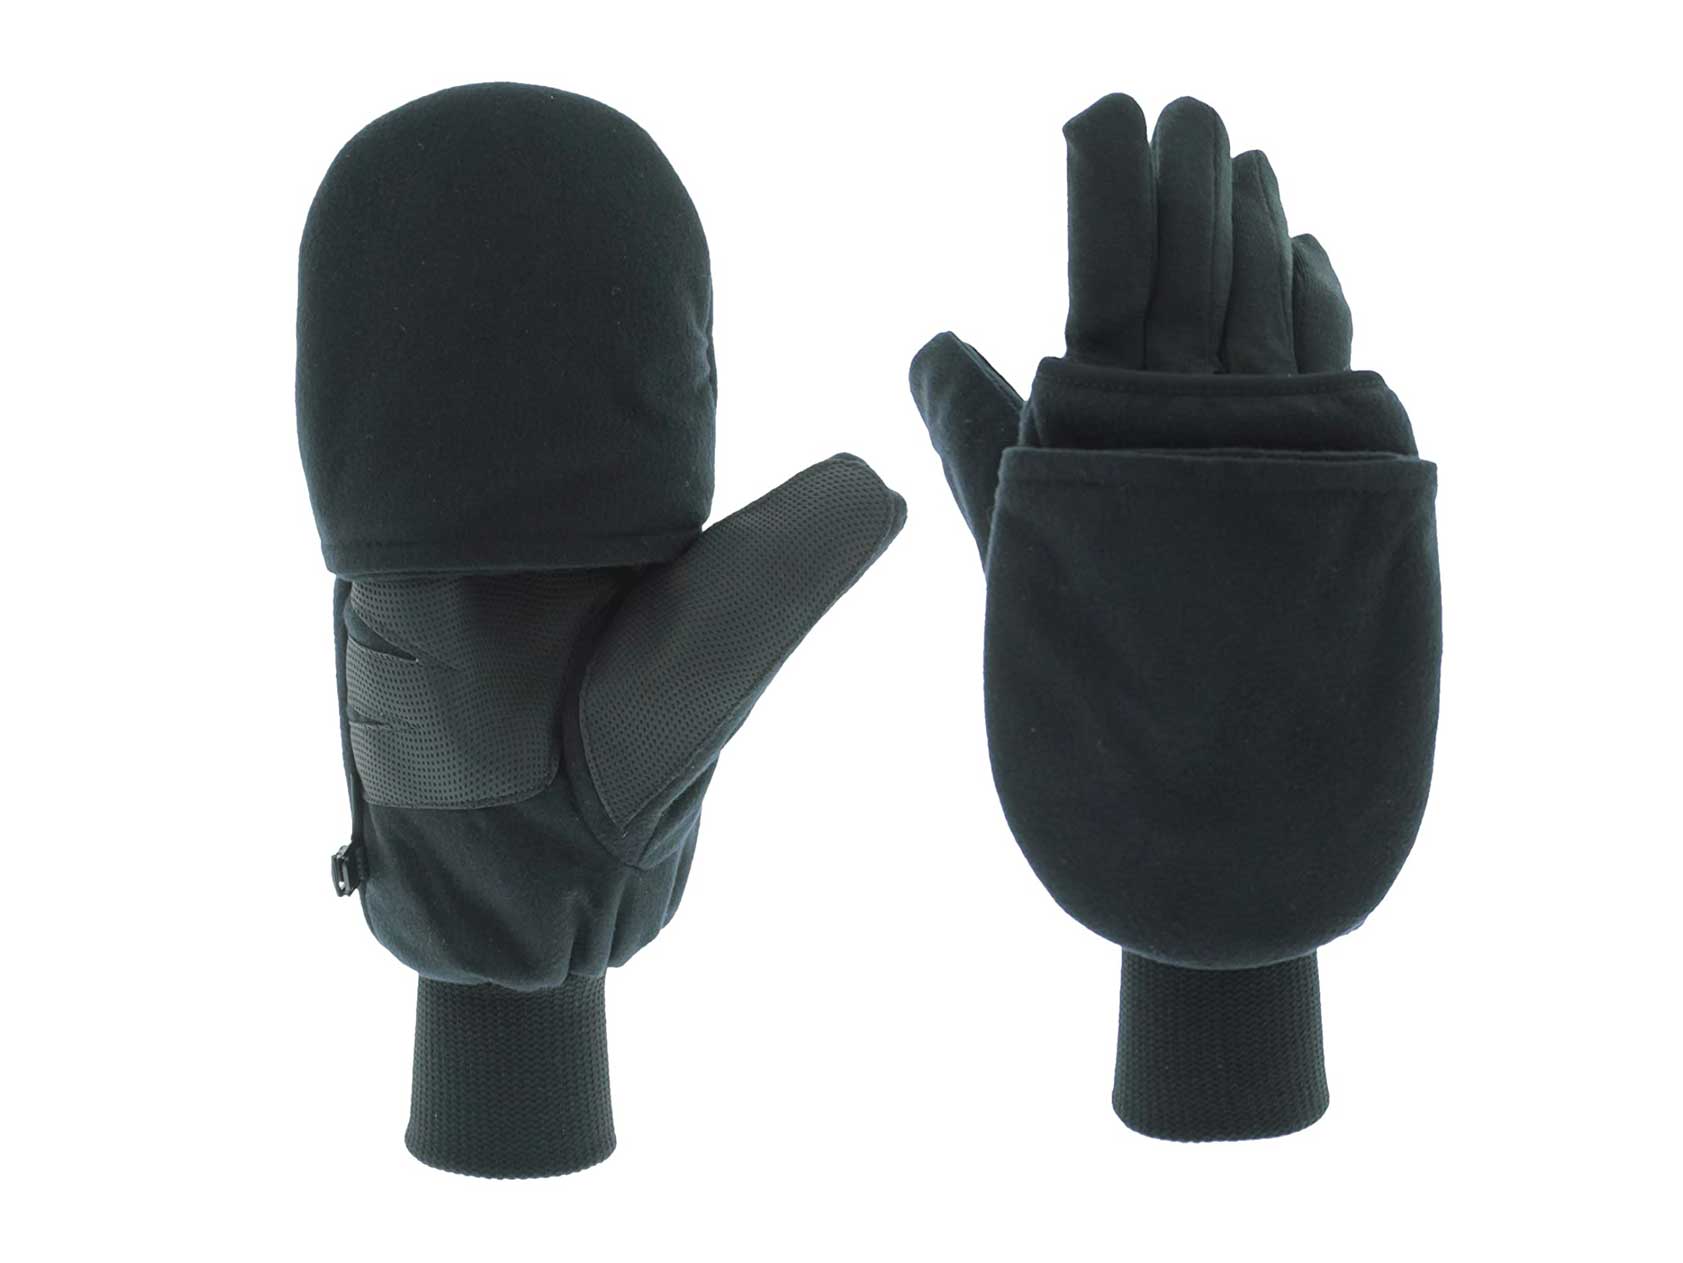 Heat Factory Gloves with Pop-Top Mittens, with Hand Heat Warmer Pockets, Black, Small